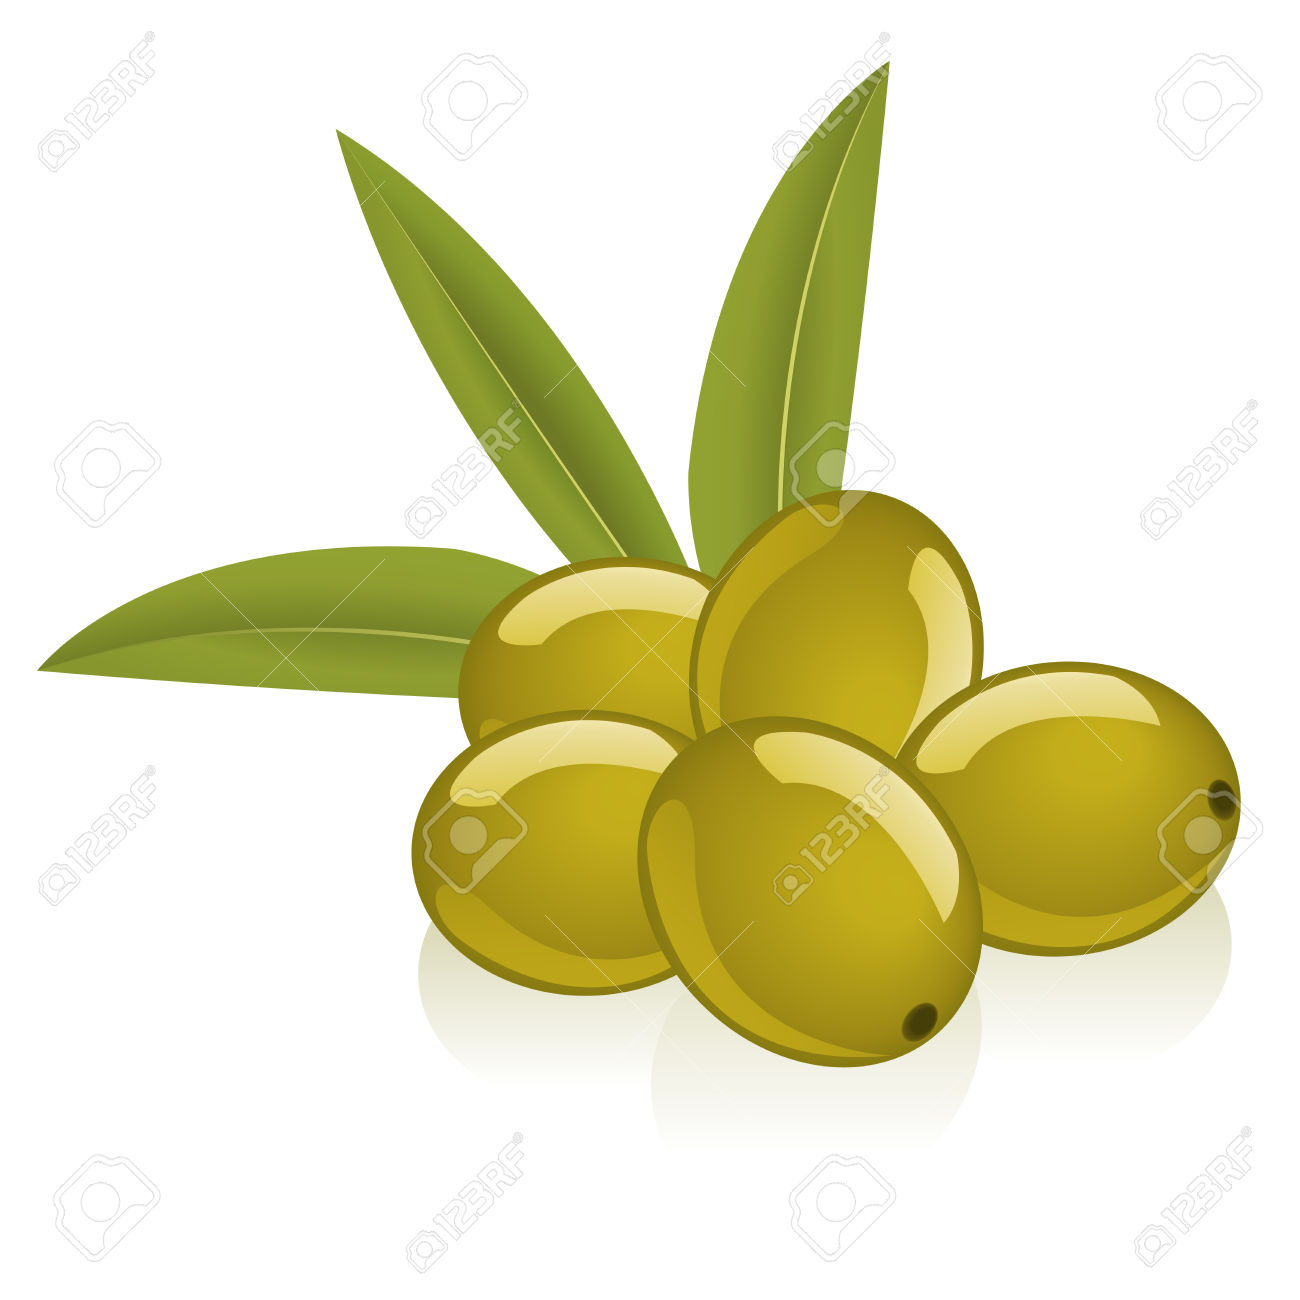 Olive clipart image